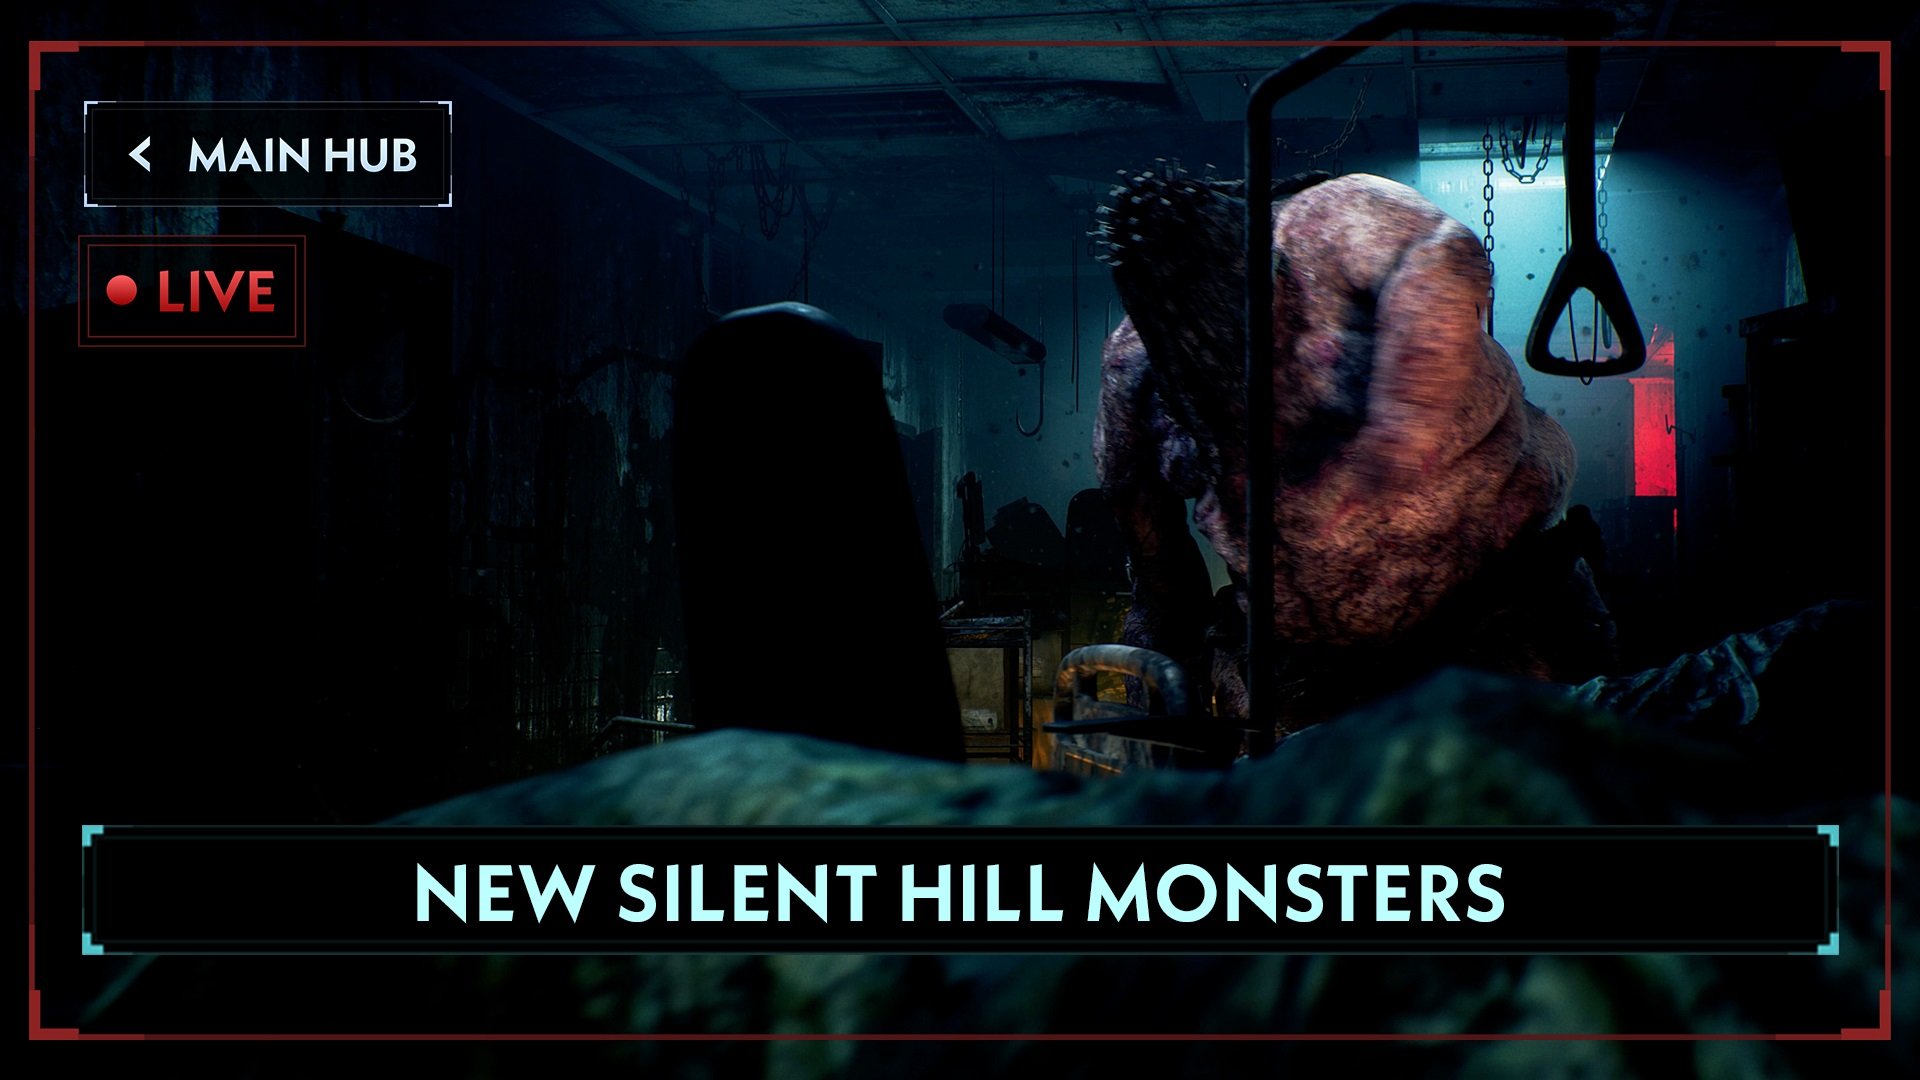 Silent Hill: Ascension added a - Silent Hill: Ascension